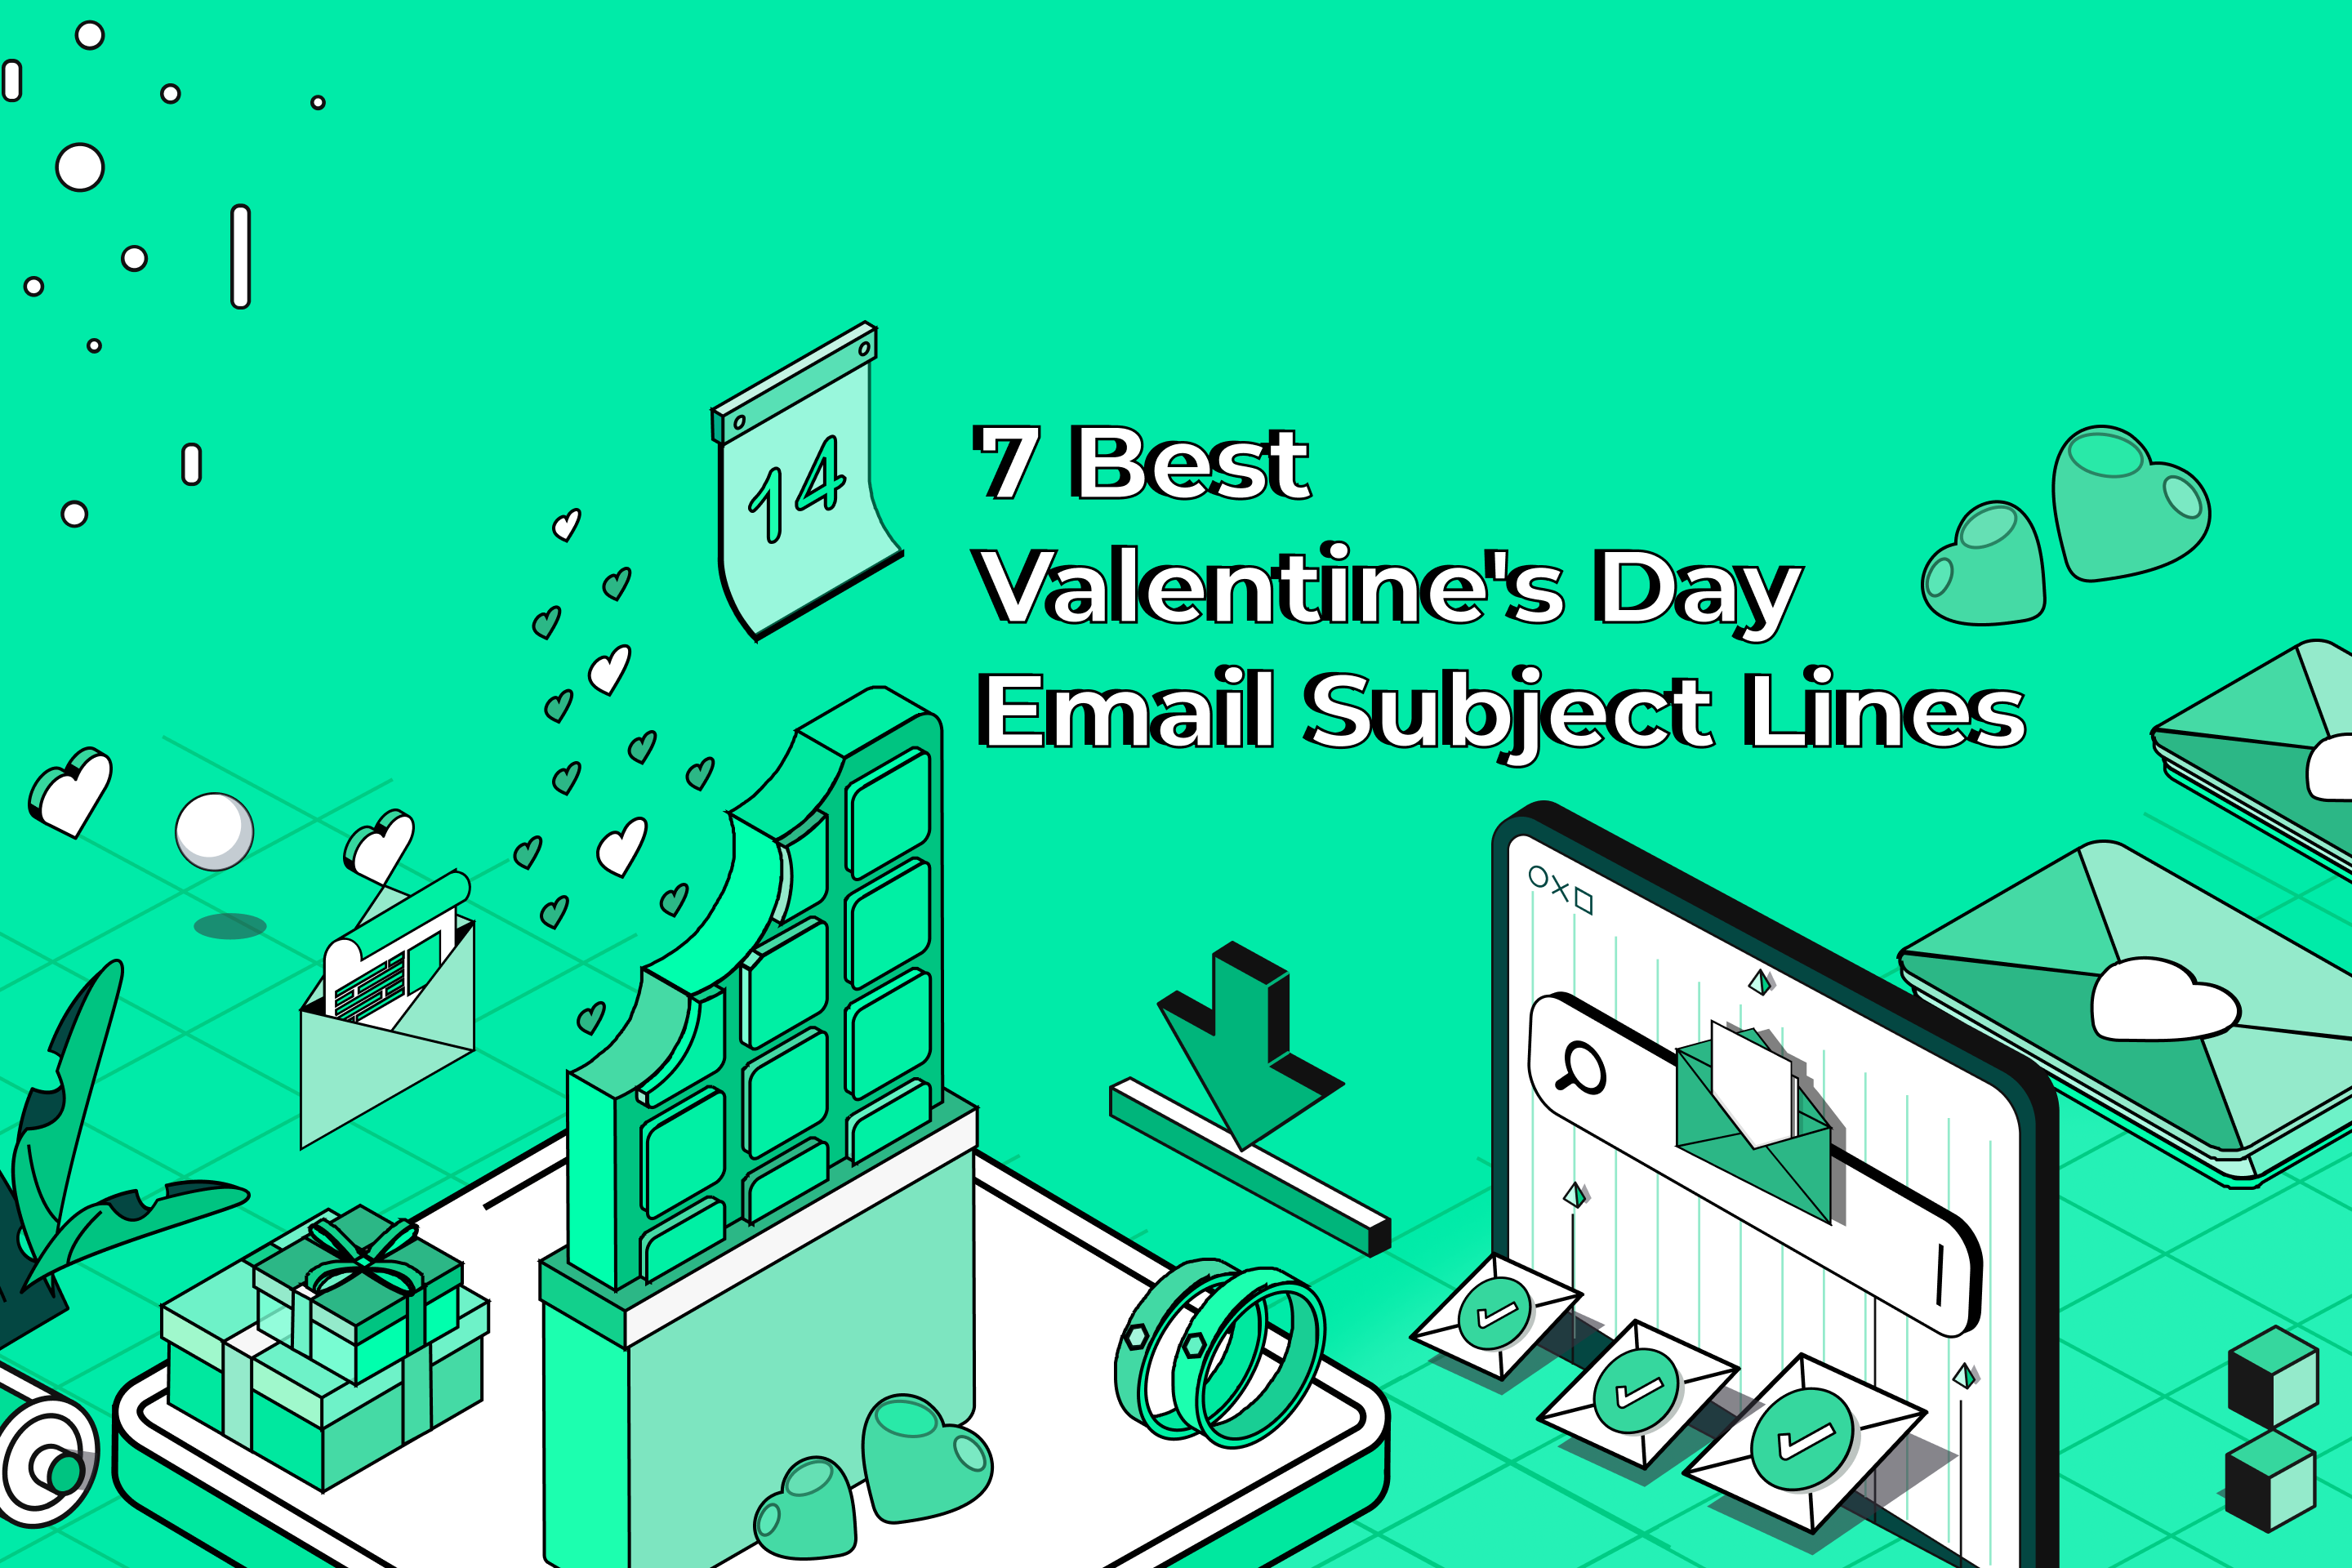 7 Best Valentine’s Day Email Subject Lines (Boost CTRs This February)